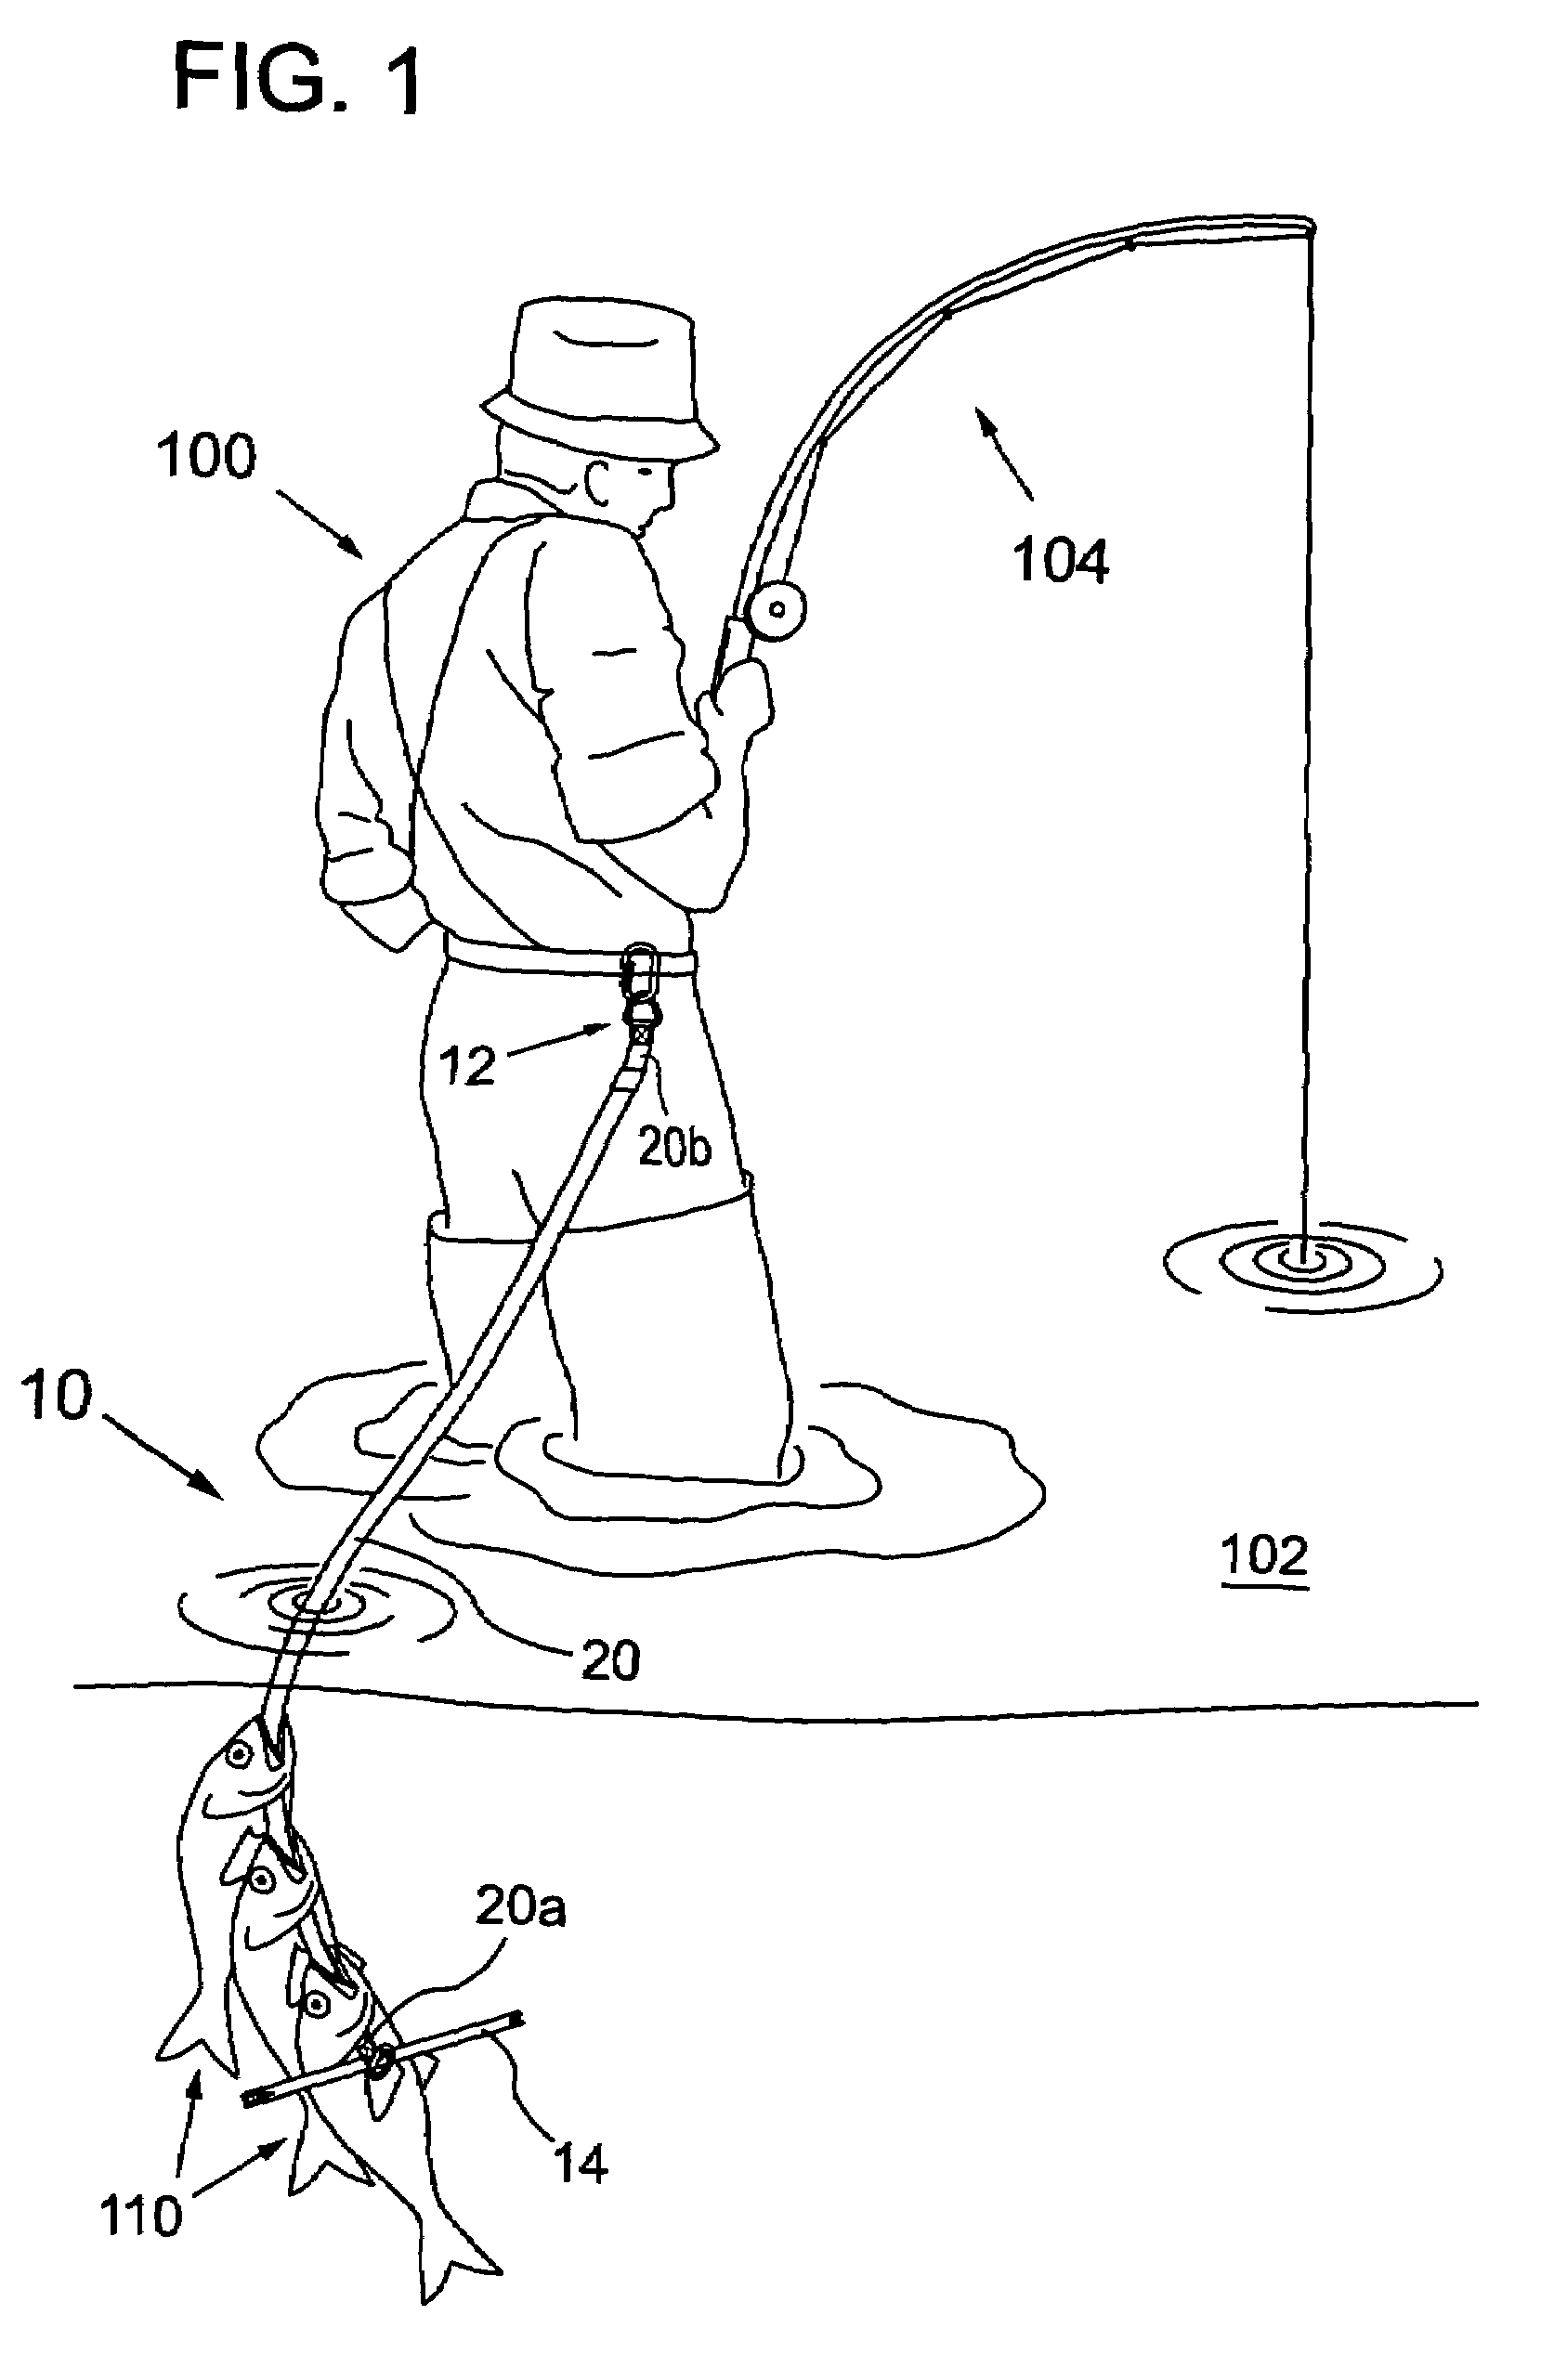 Fishing stringer with multiple integral fishing tools